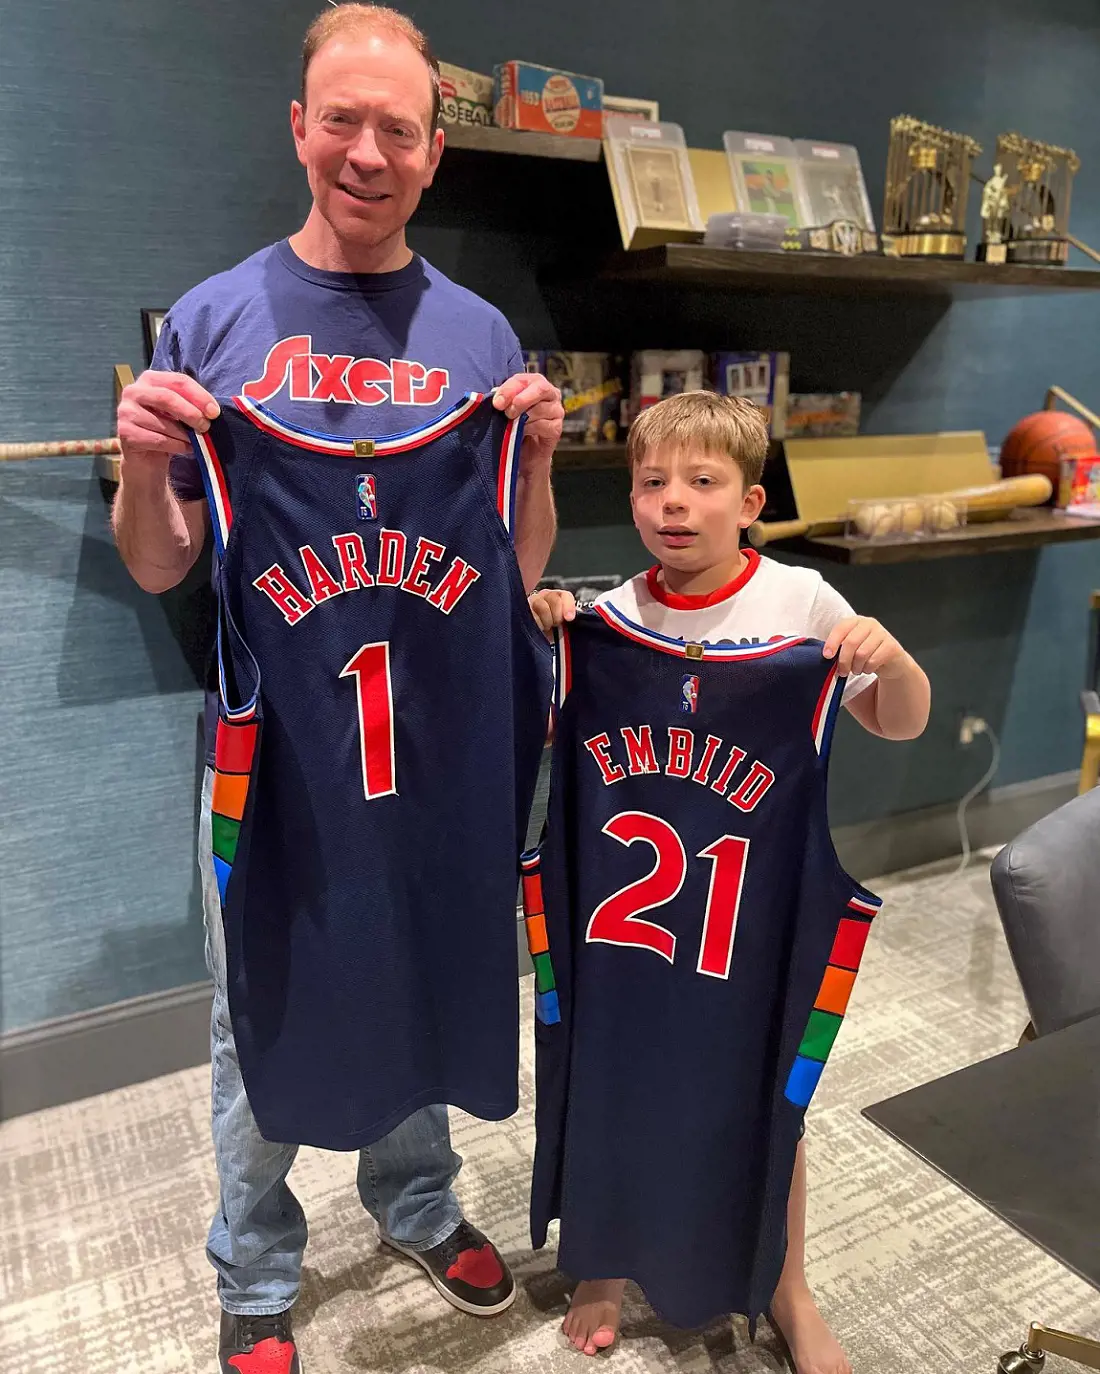 Ken along with his son Paul holding Sixers game used uniform of Harden and Embiid. 